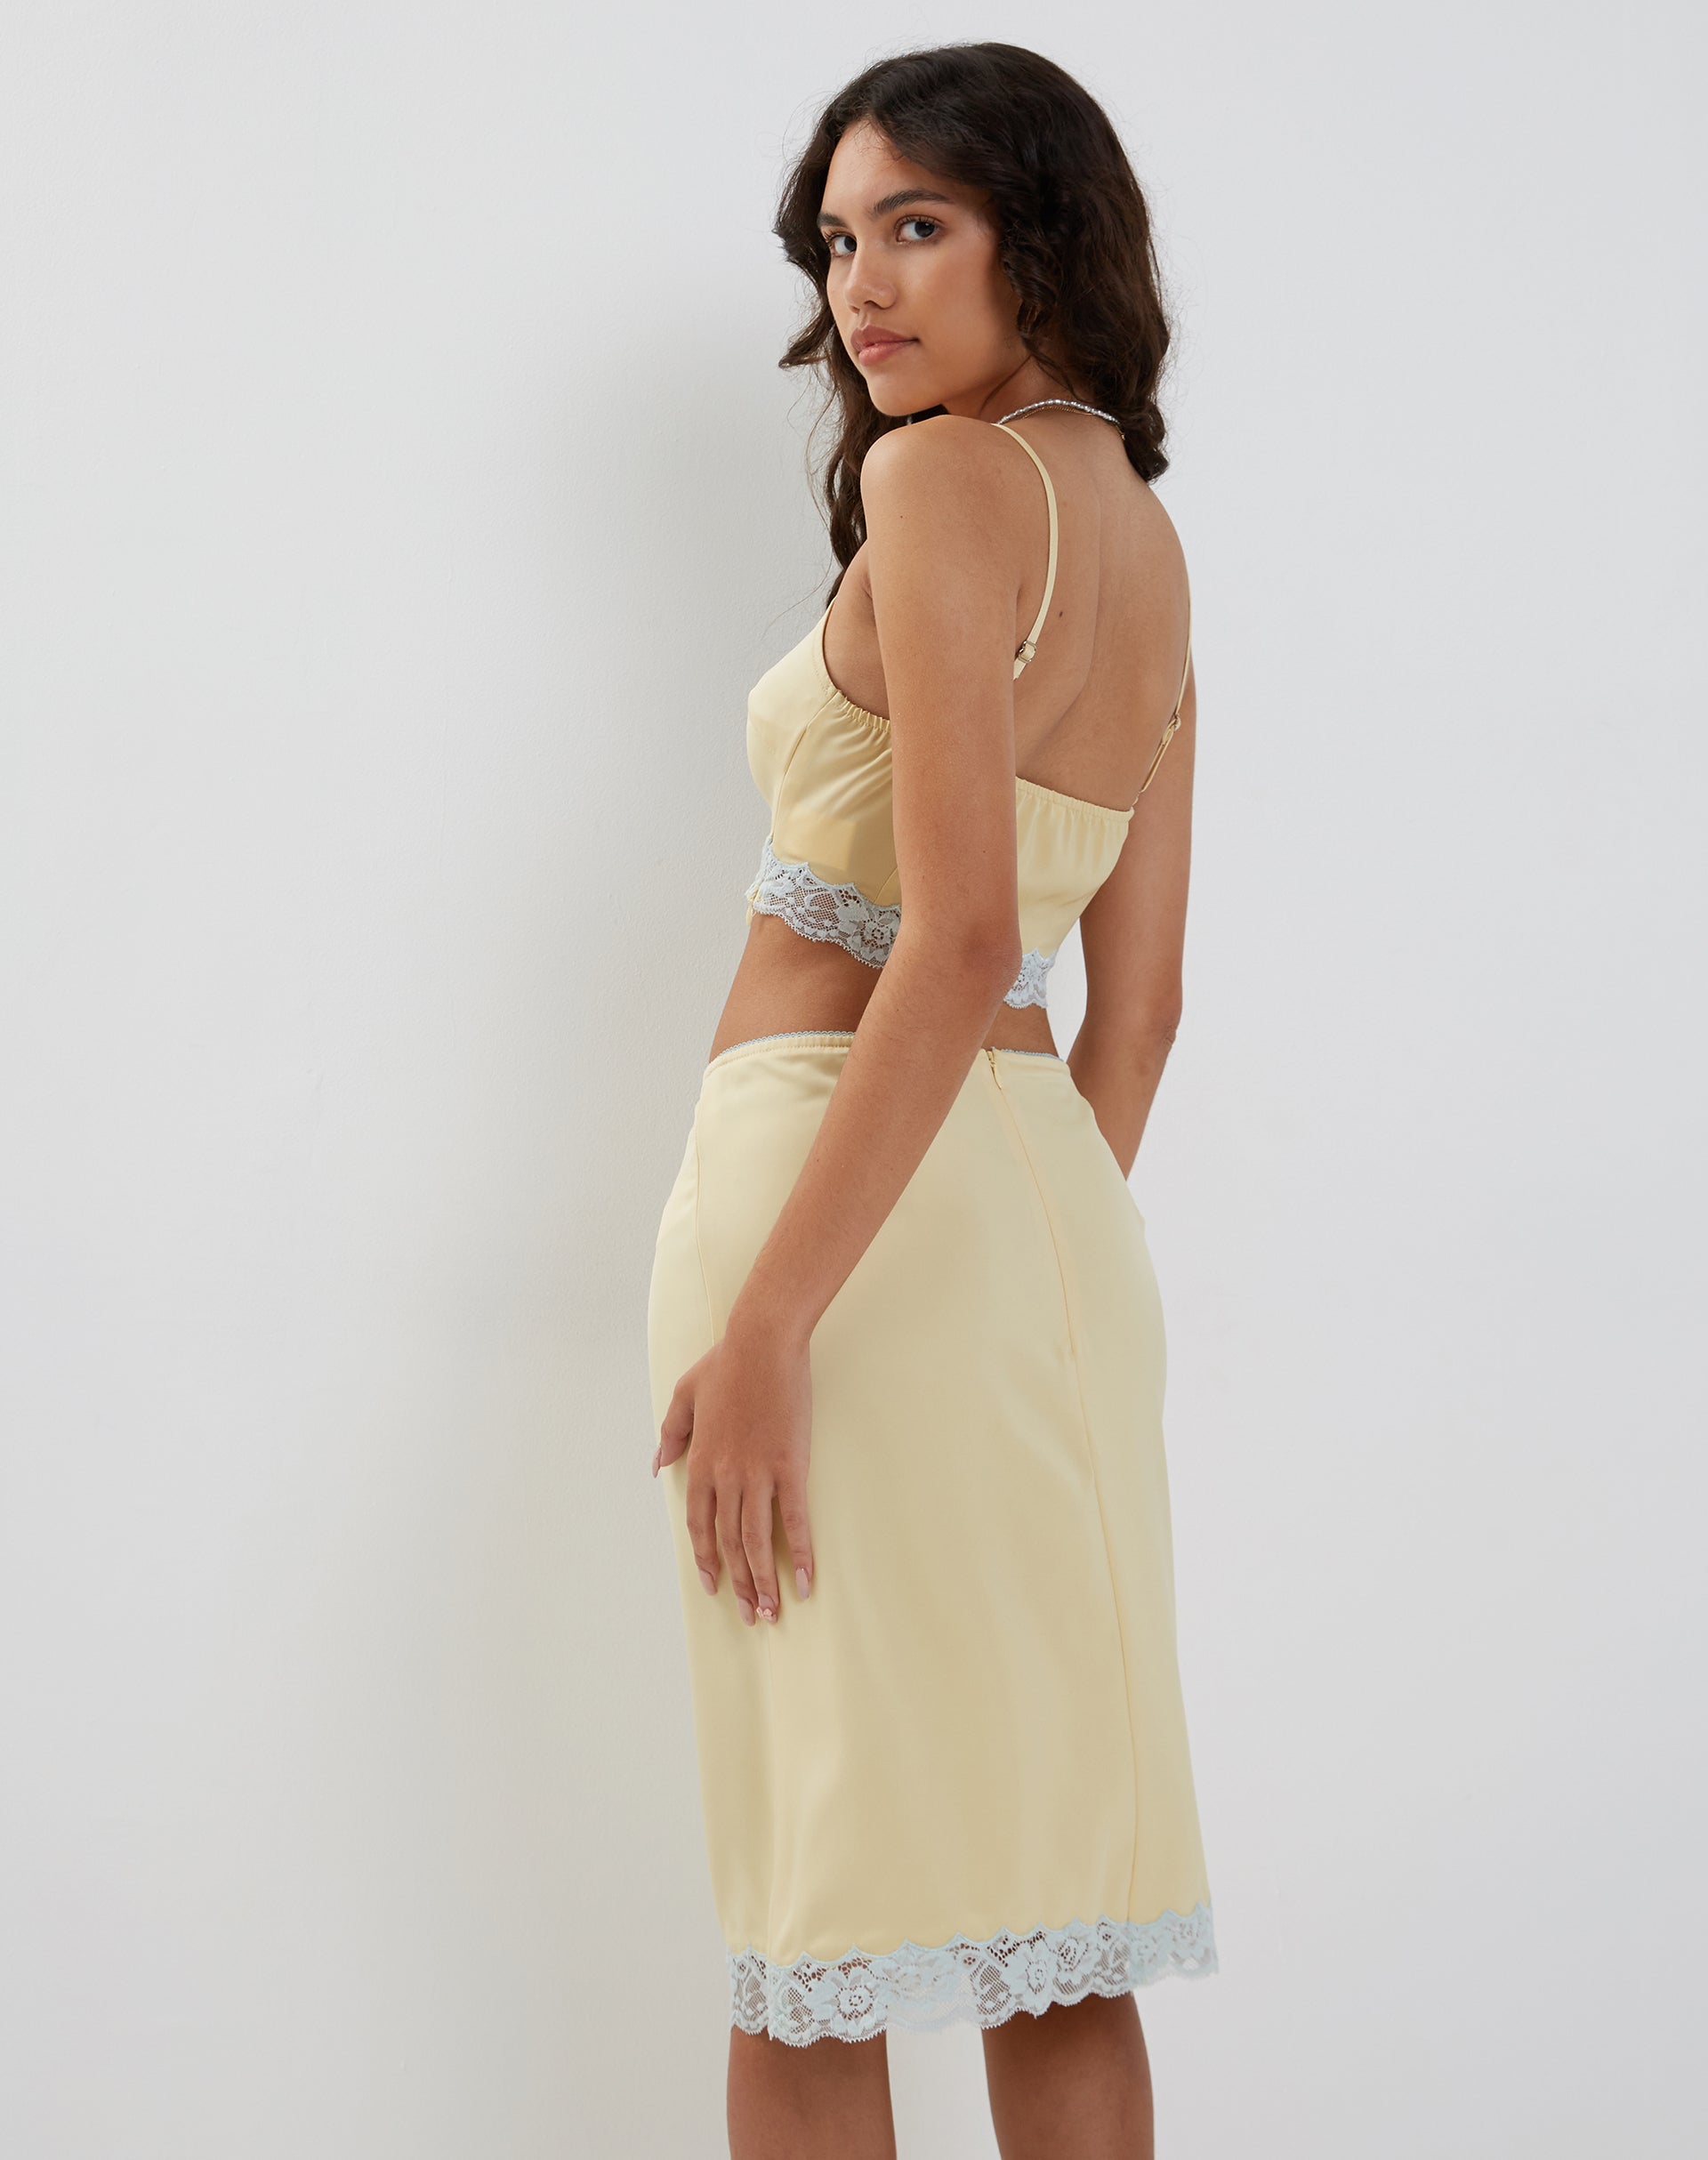 Image of Resika Low Rise Midi Skirt in Satin Pale Yellow